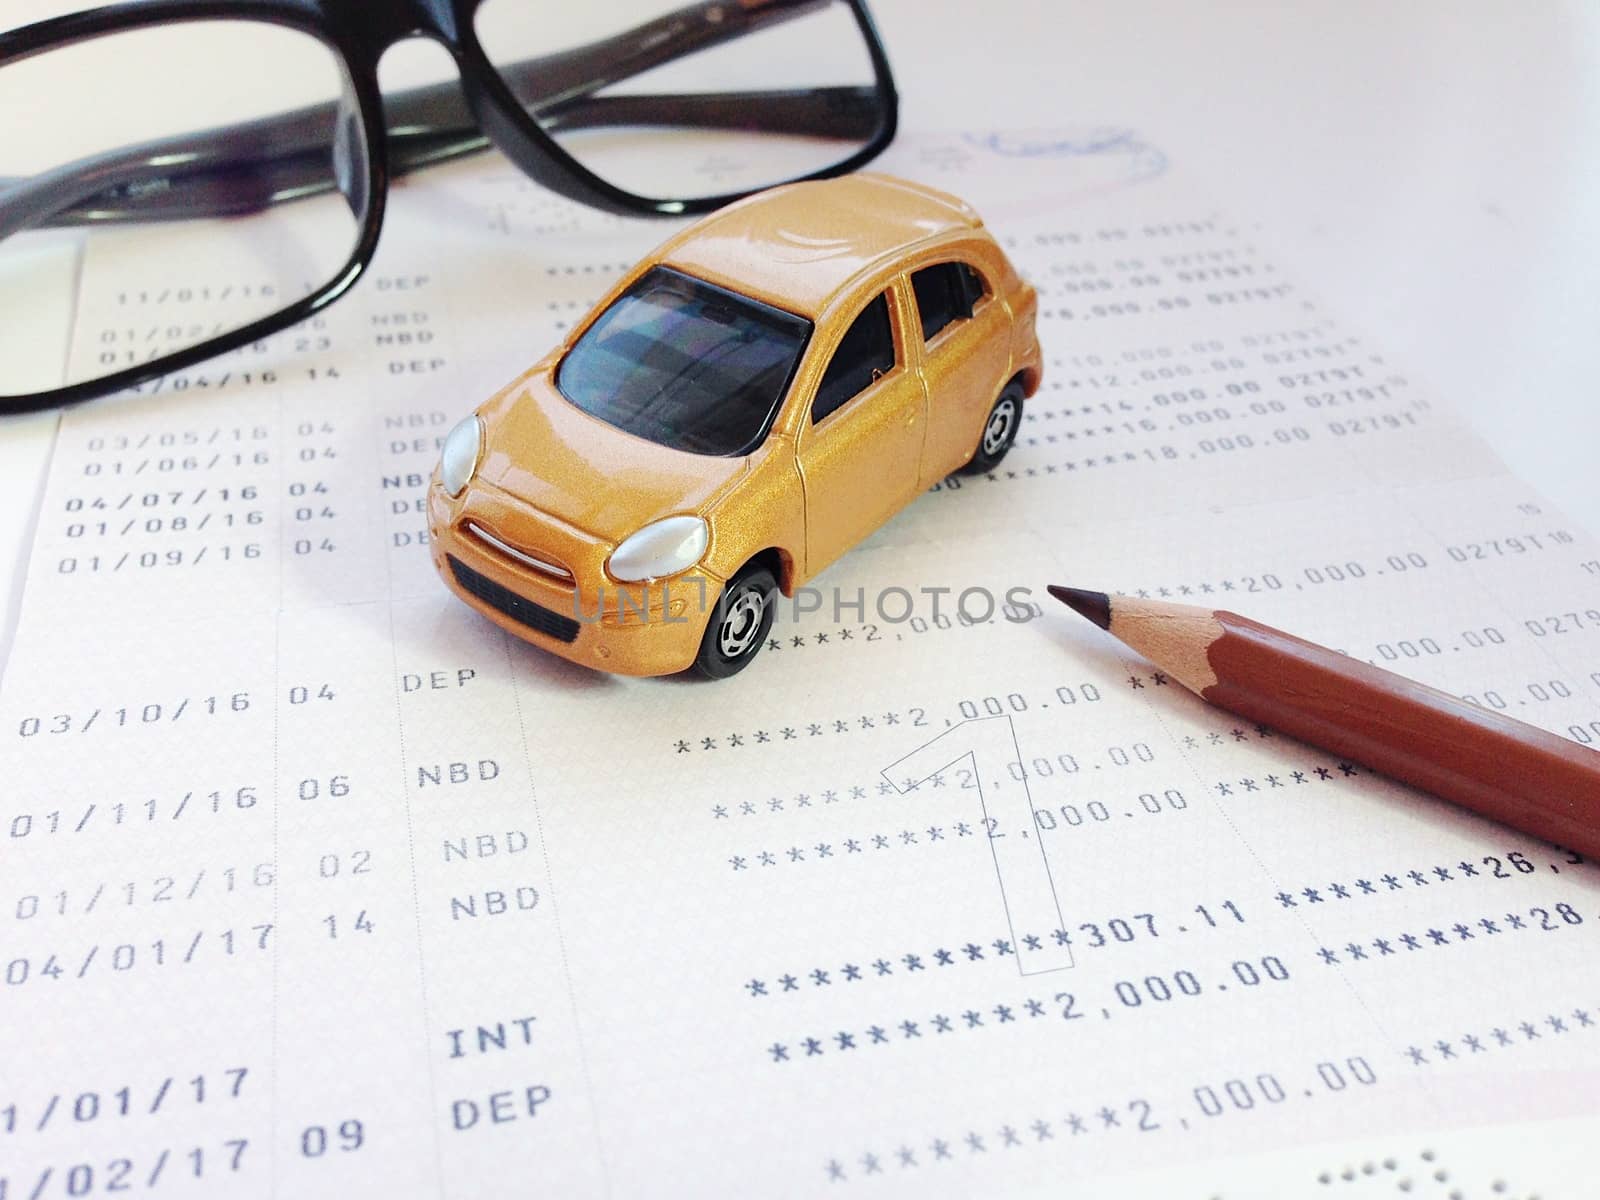 Business, finance, savings, banking or car loan concept : Miniature car model, pencil, eyeglasses and savings account passbook or financial statement on white background